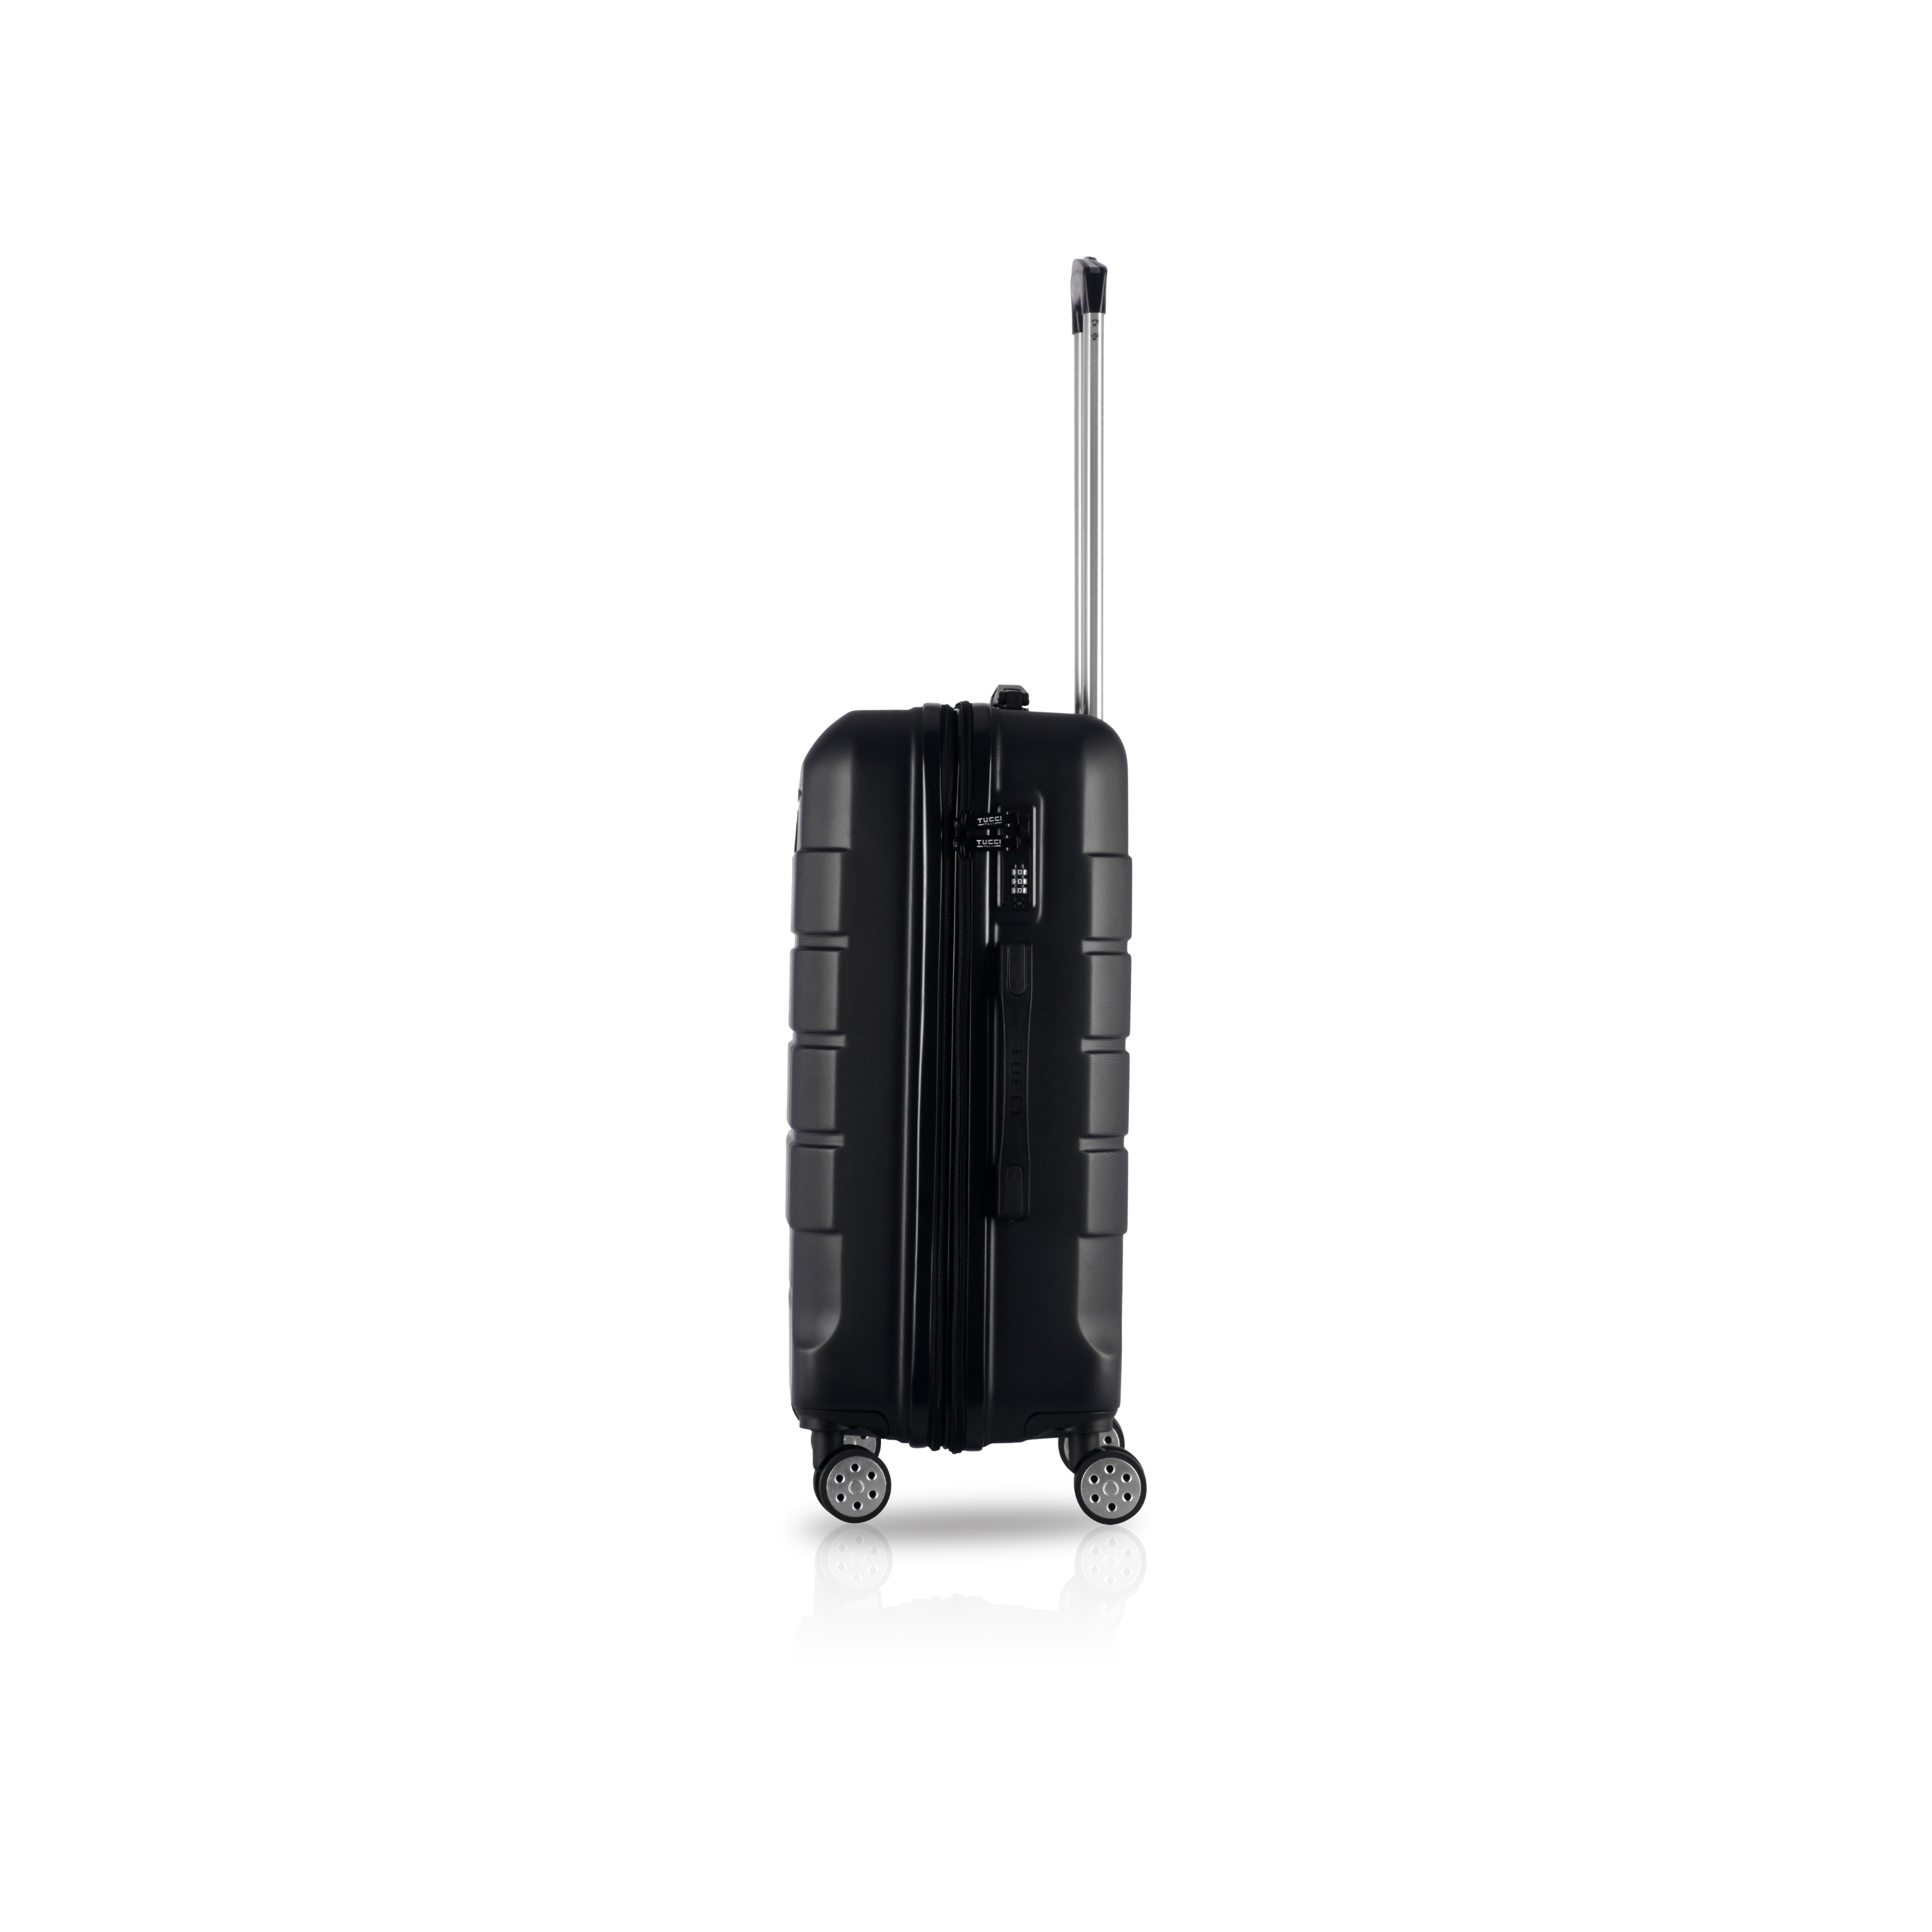 TUCCI CONSOLE ABS 28" Large Luggage